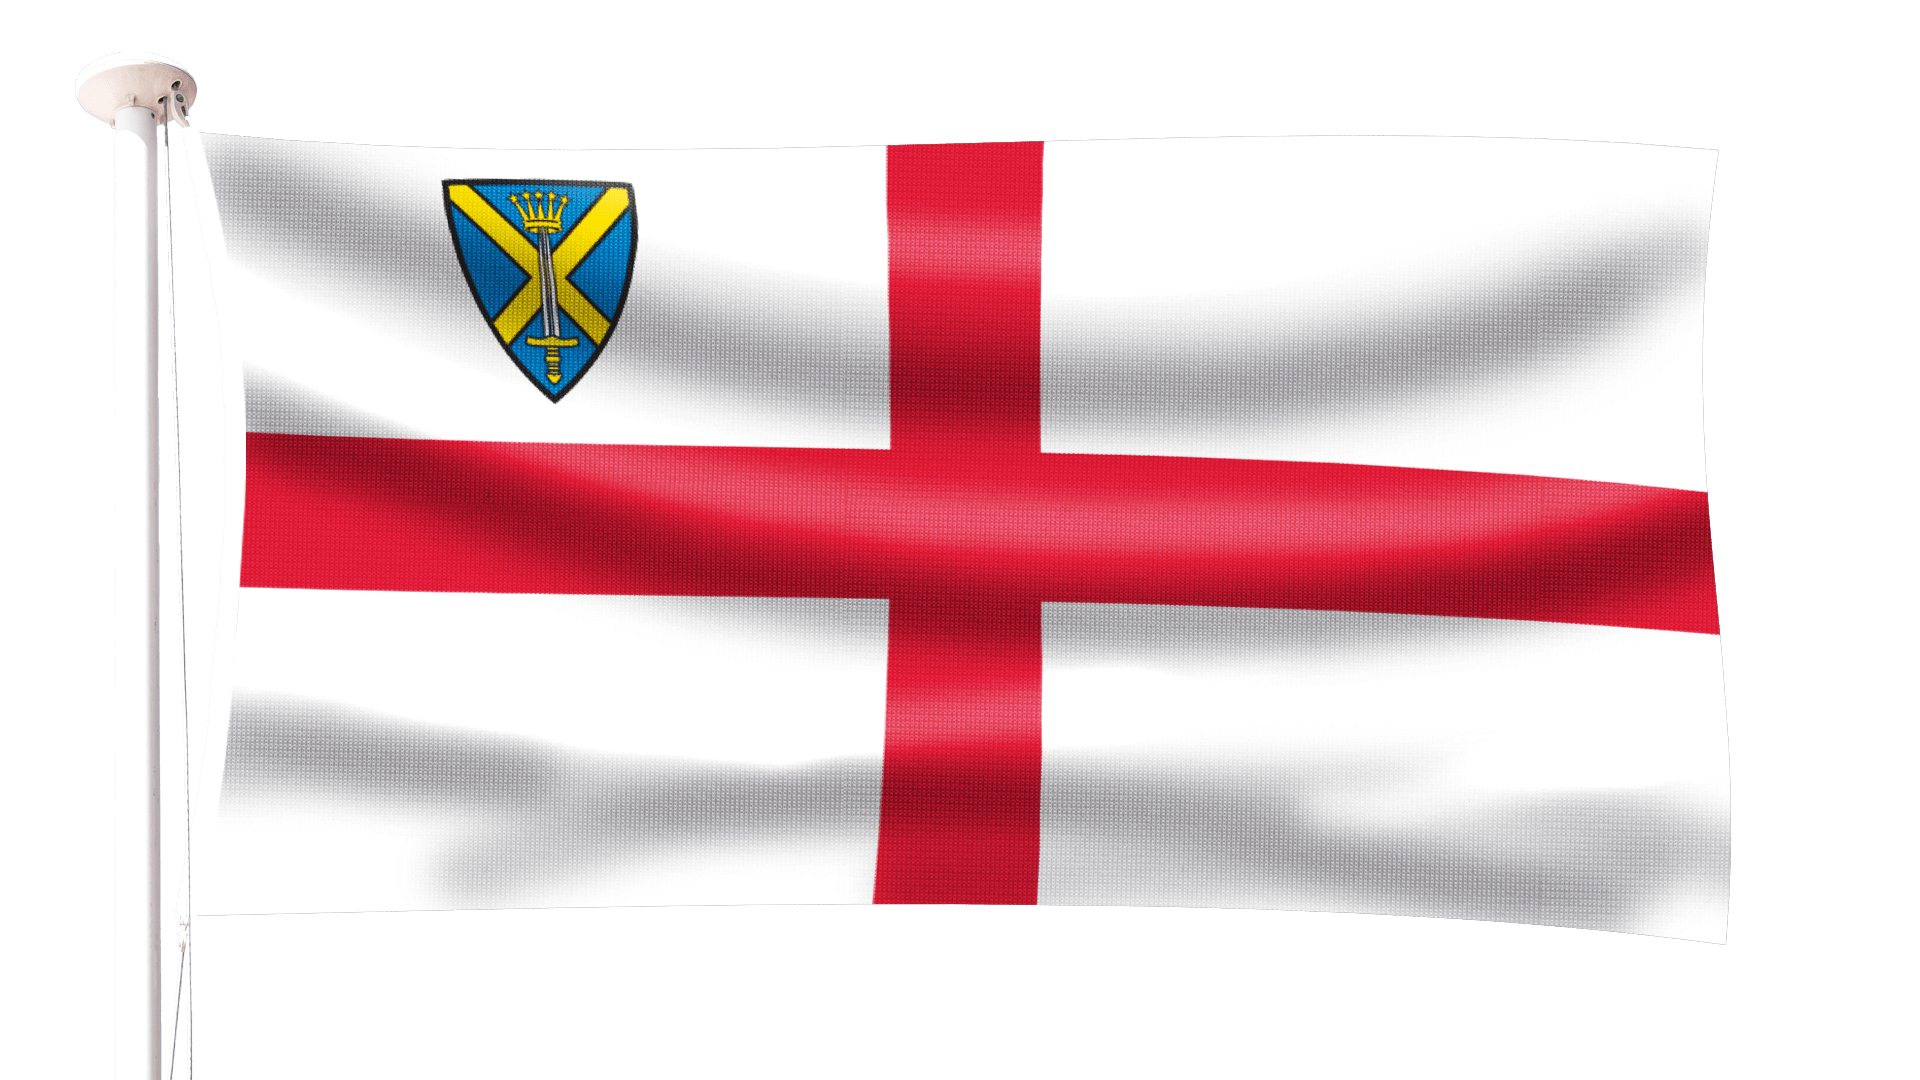 St Albans Diocese Flag - Hampshire Flag Company